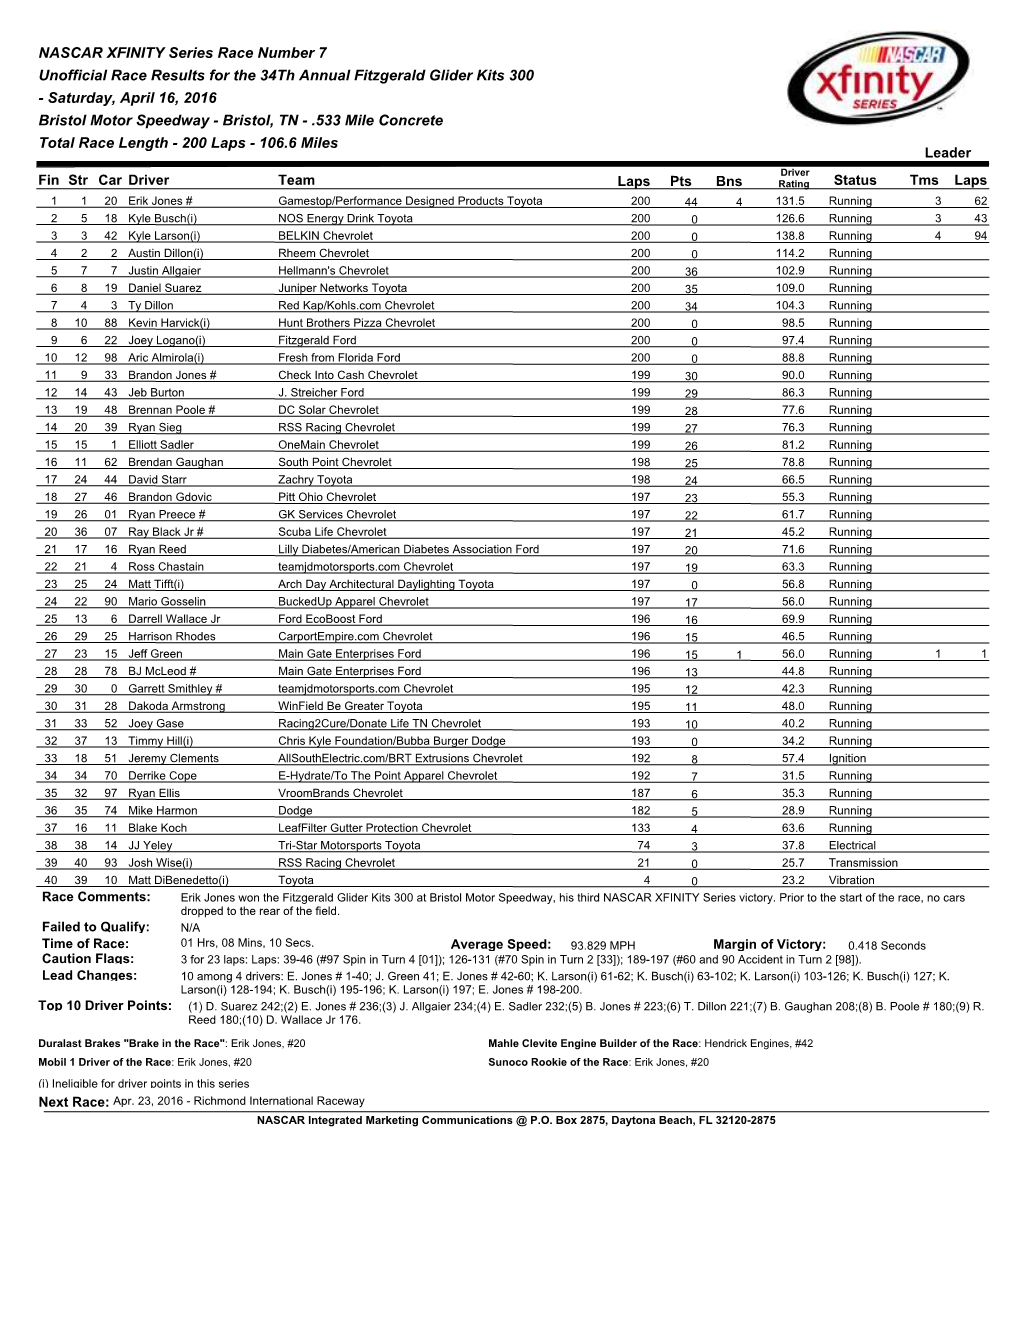 NASCAR XFINITY Series Race Number 7 Unofficial Race Results